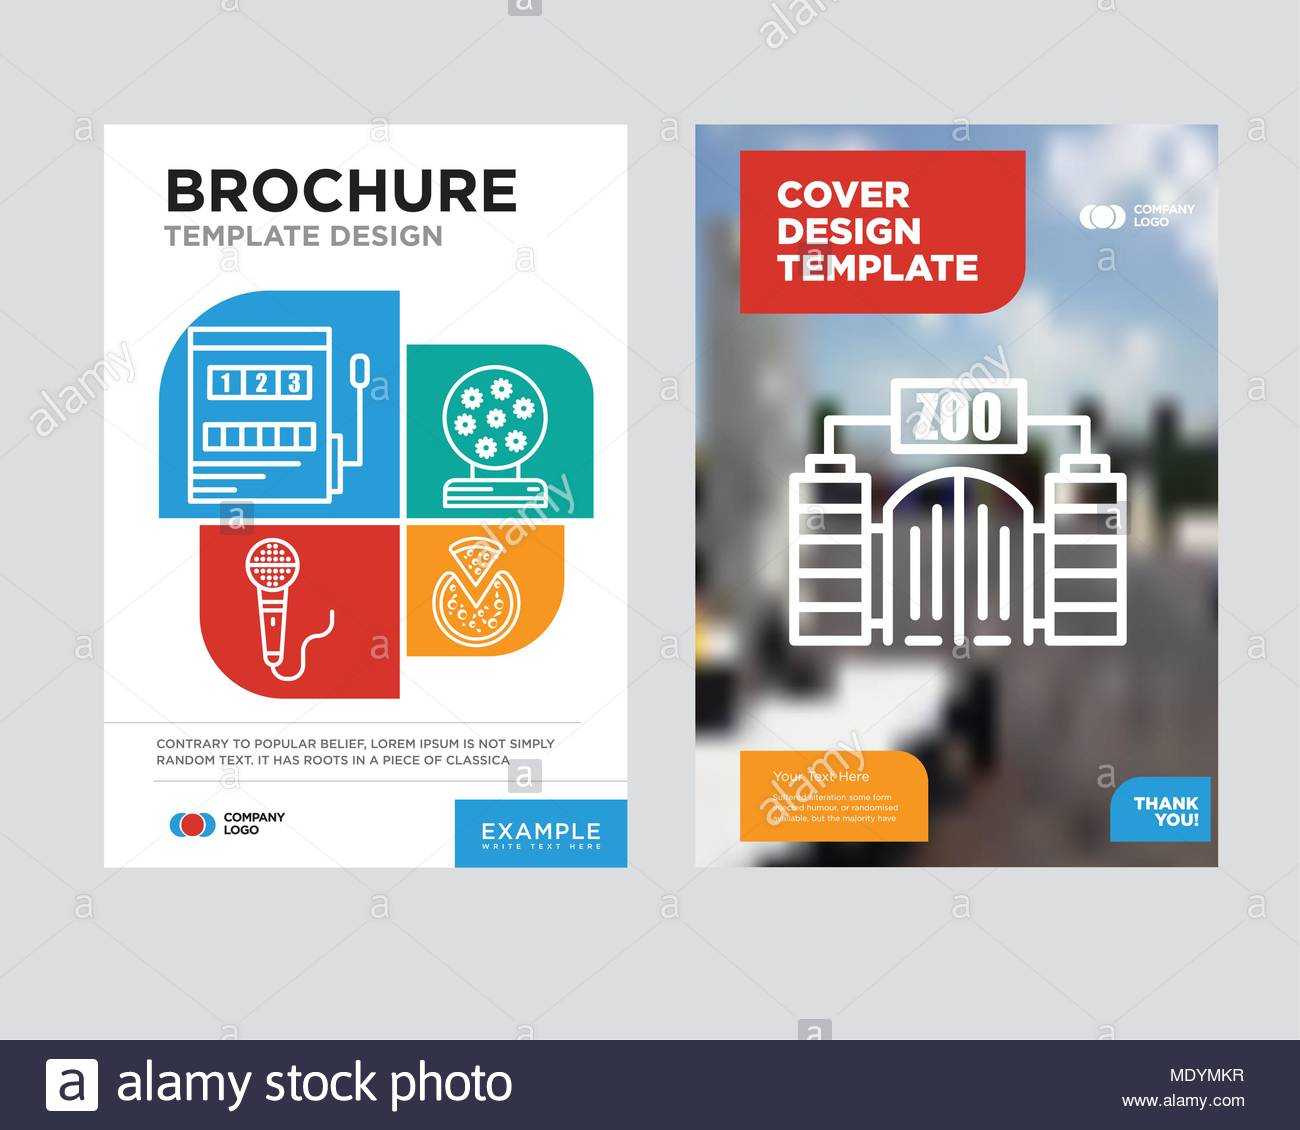 Zoo Brochure Flyer Design Template With Abstract Photo Pertaining To Zoo Brochure Template